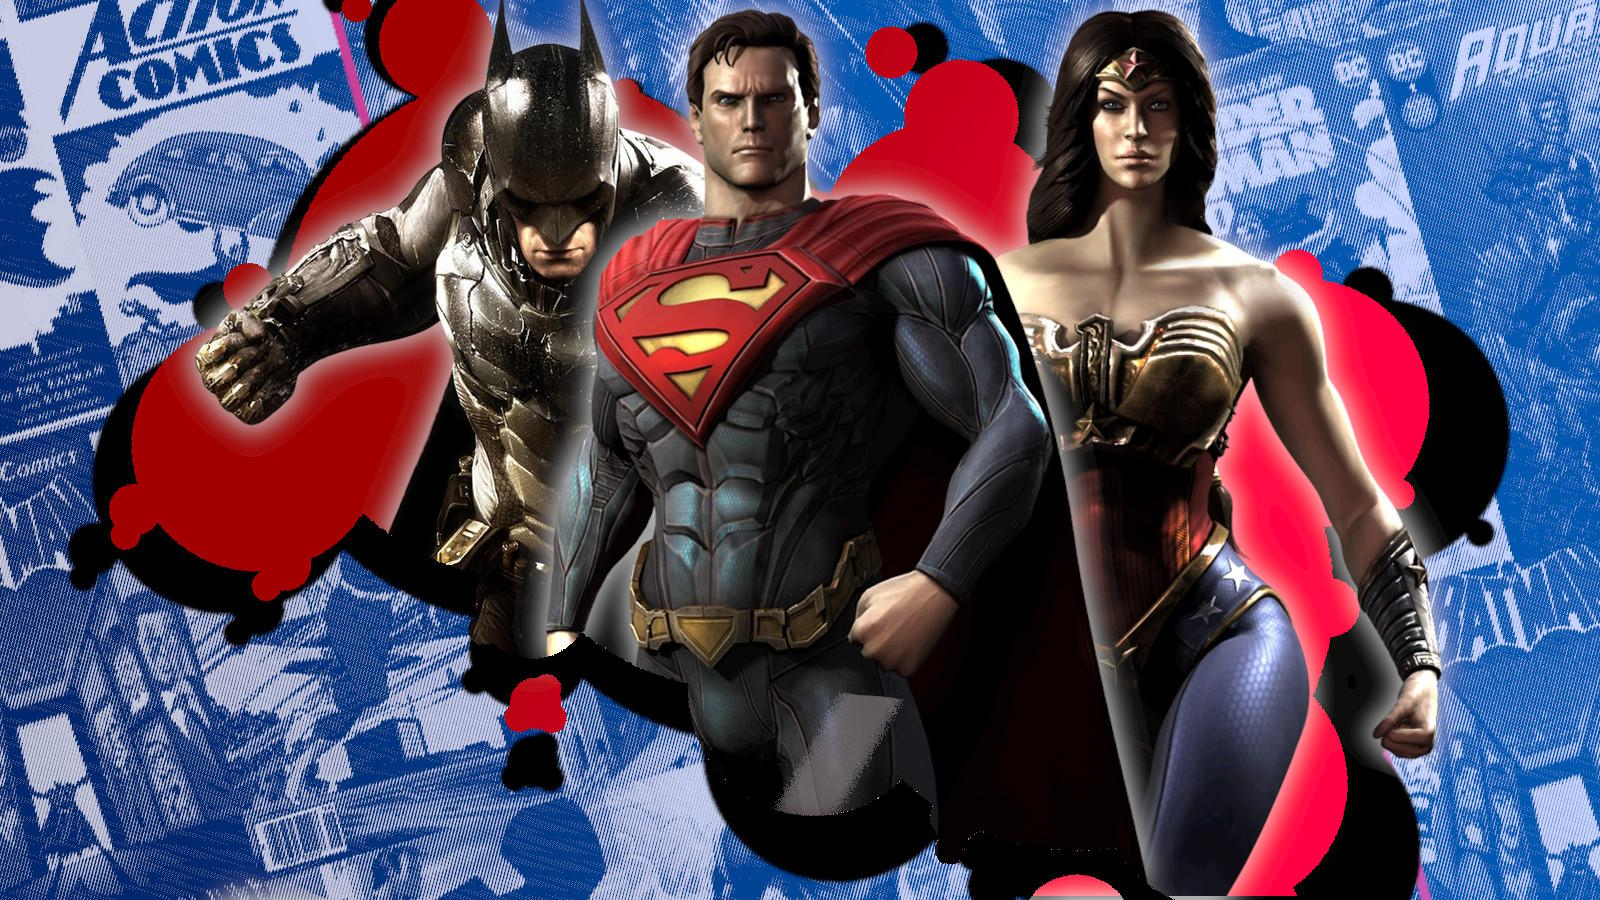 Batman, Superman and Wonder Woman lead our coverage of the best DC games